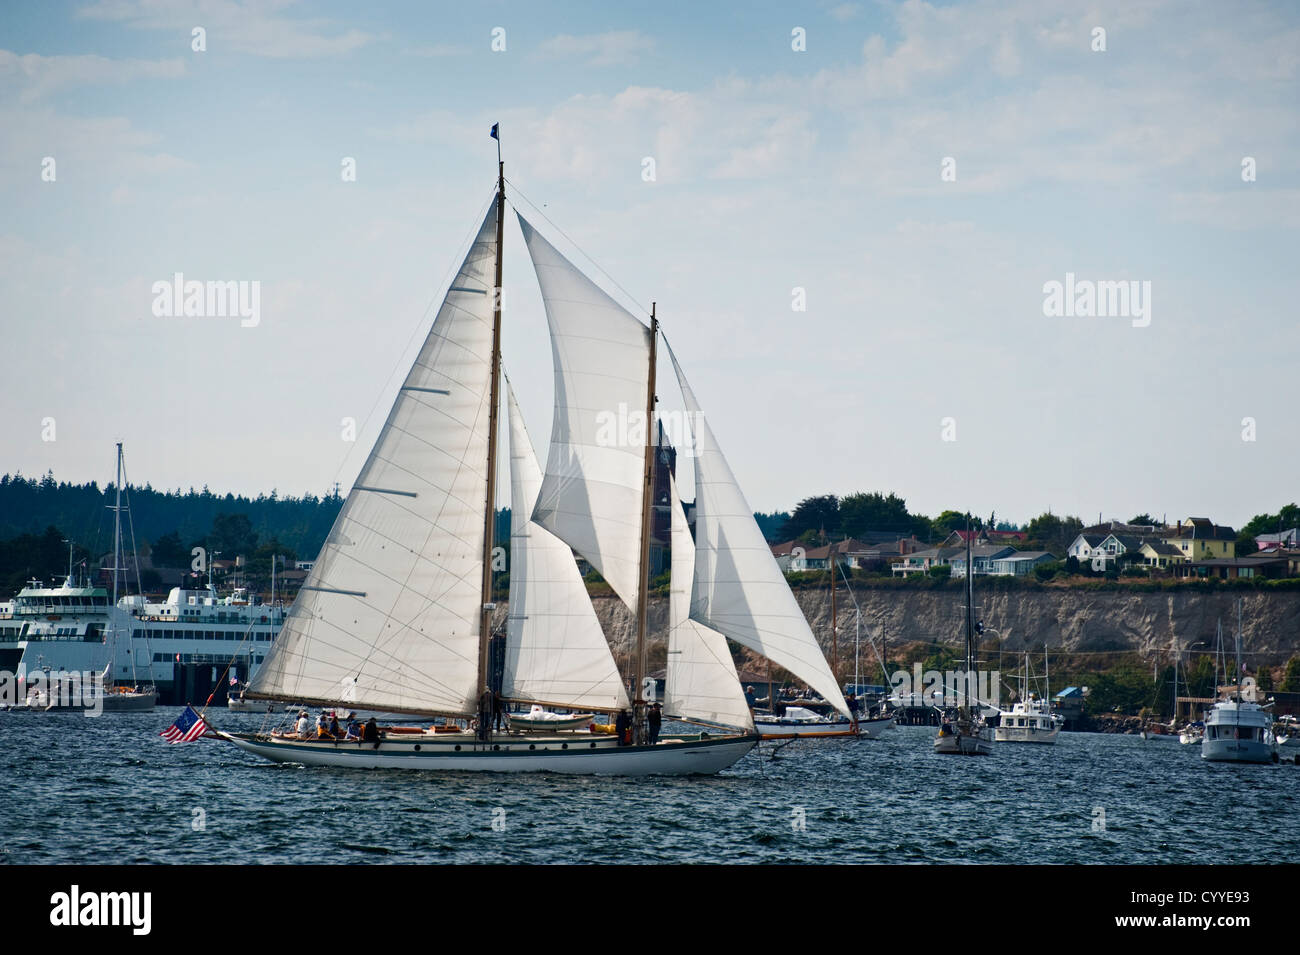 A sailboat race held during the Port Townsend, Washington, Wooden Boat ...